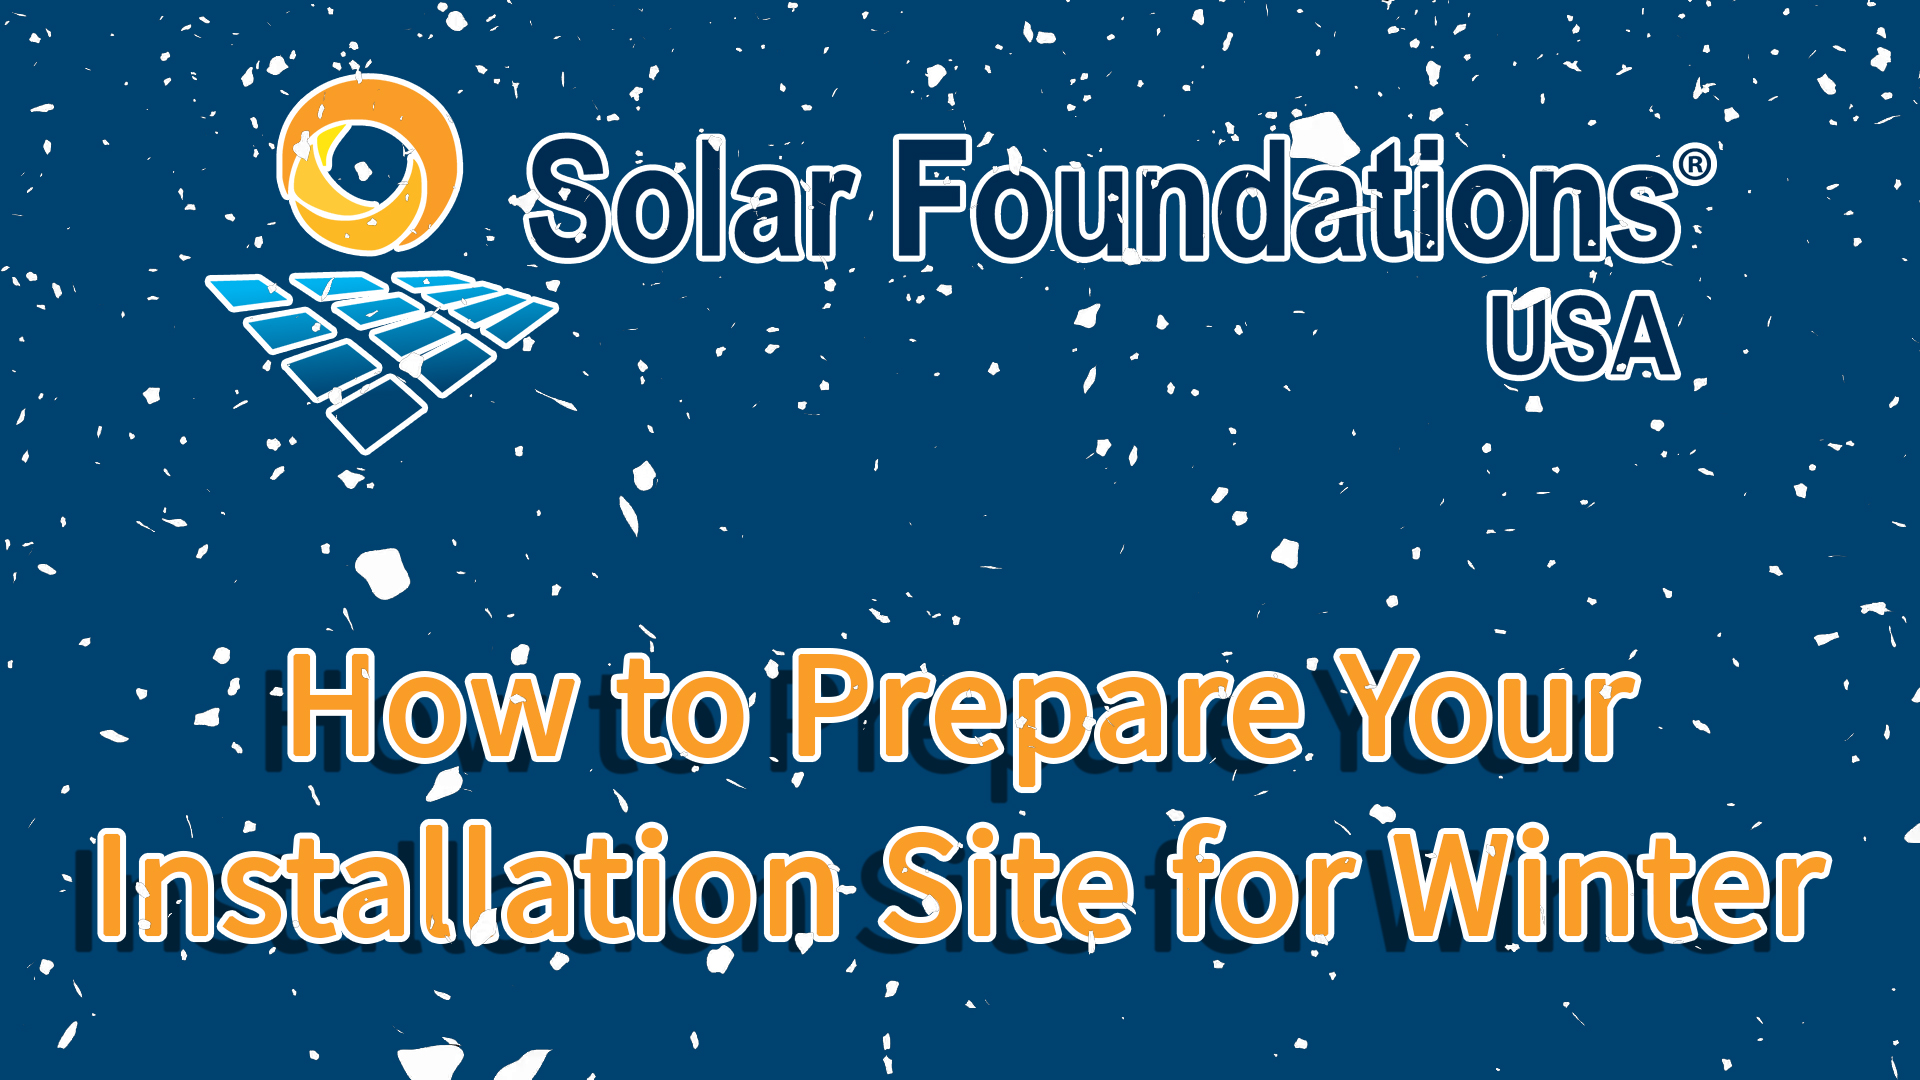 How to Prepare Your Installation Site for Winter